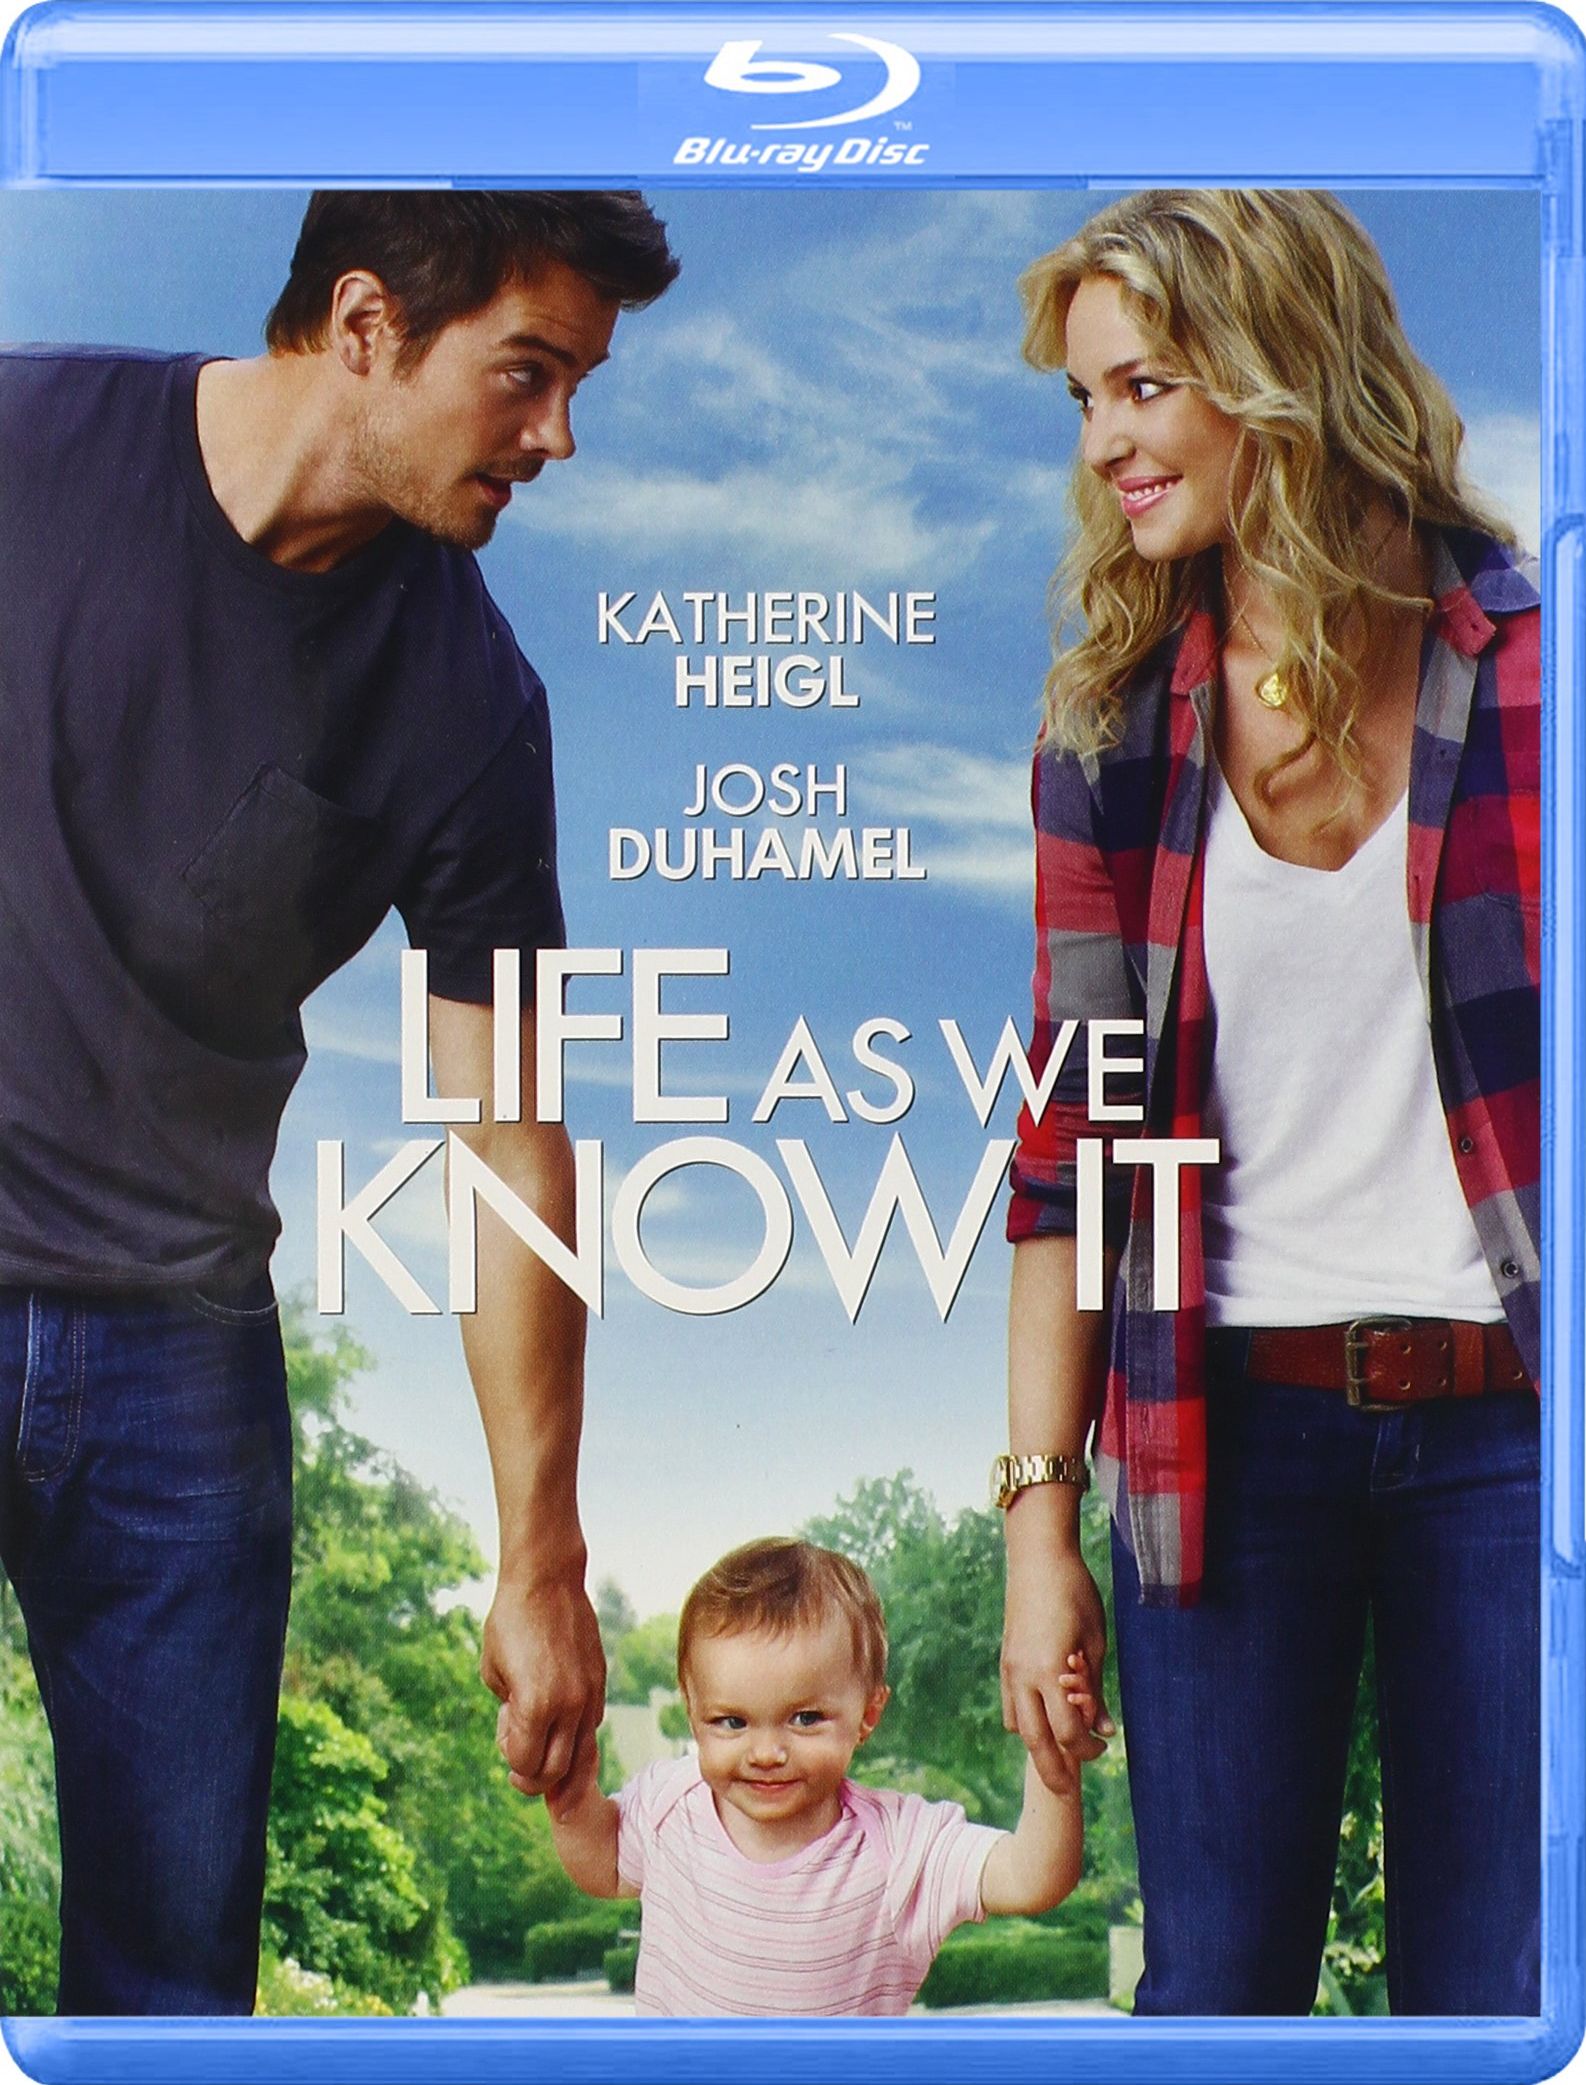 Life as We Know It DVD Release Date February 8, 2011